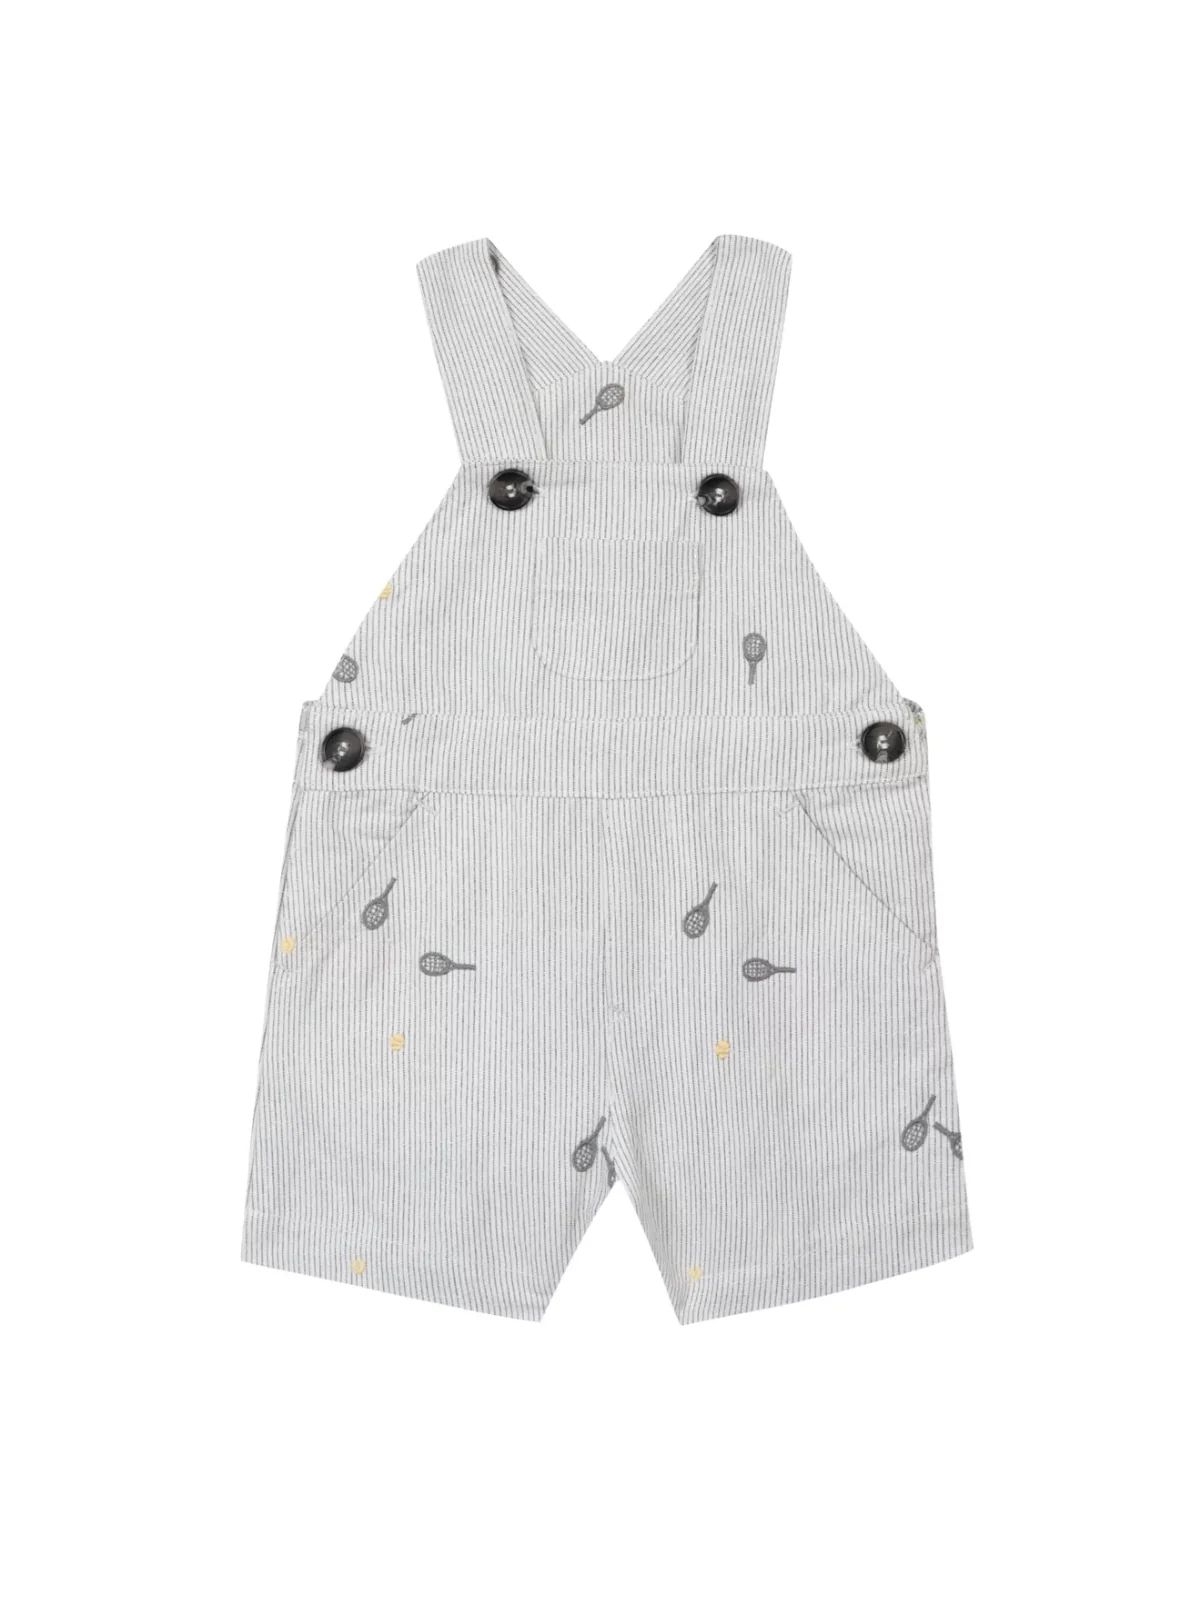 Tennis Embroidered Overalls | Danrie